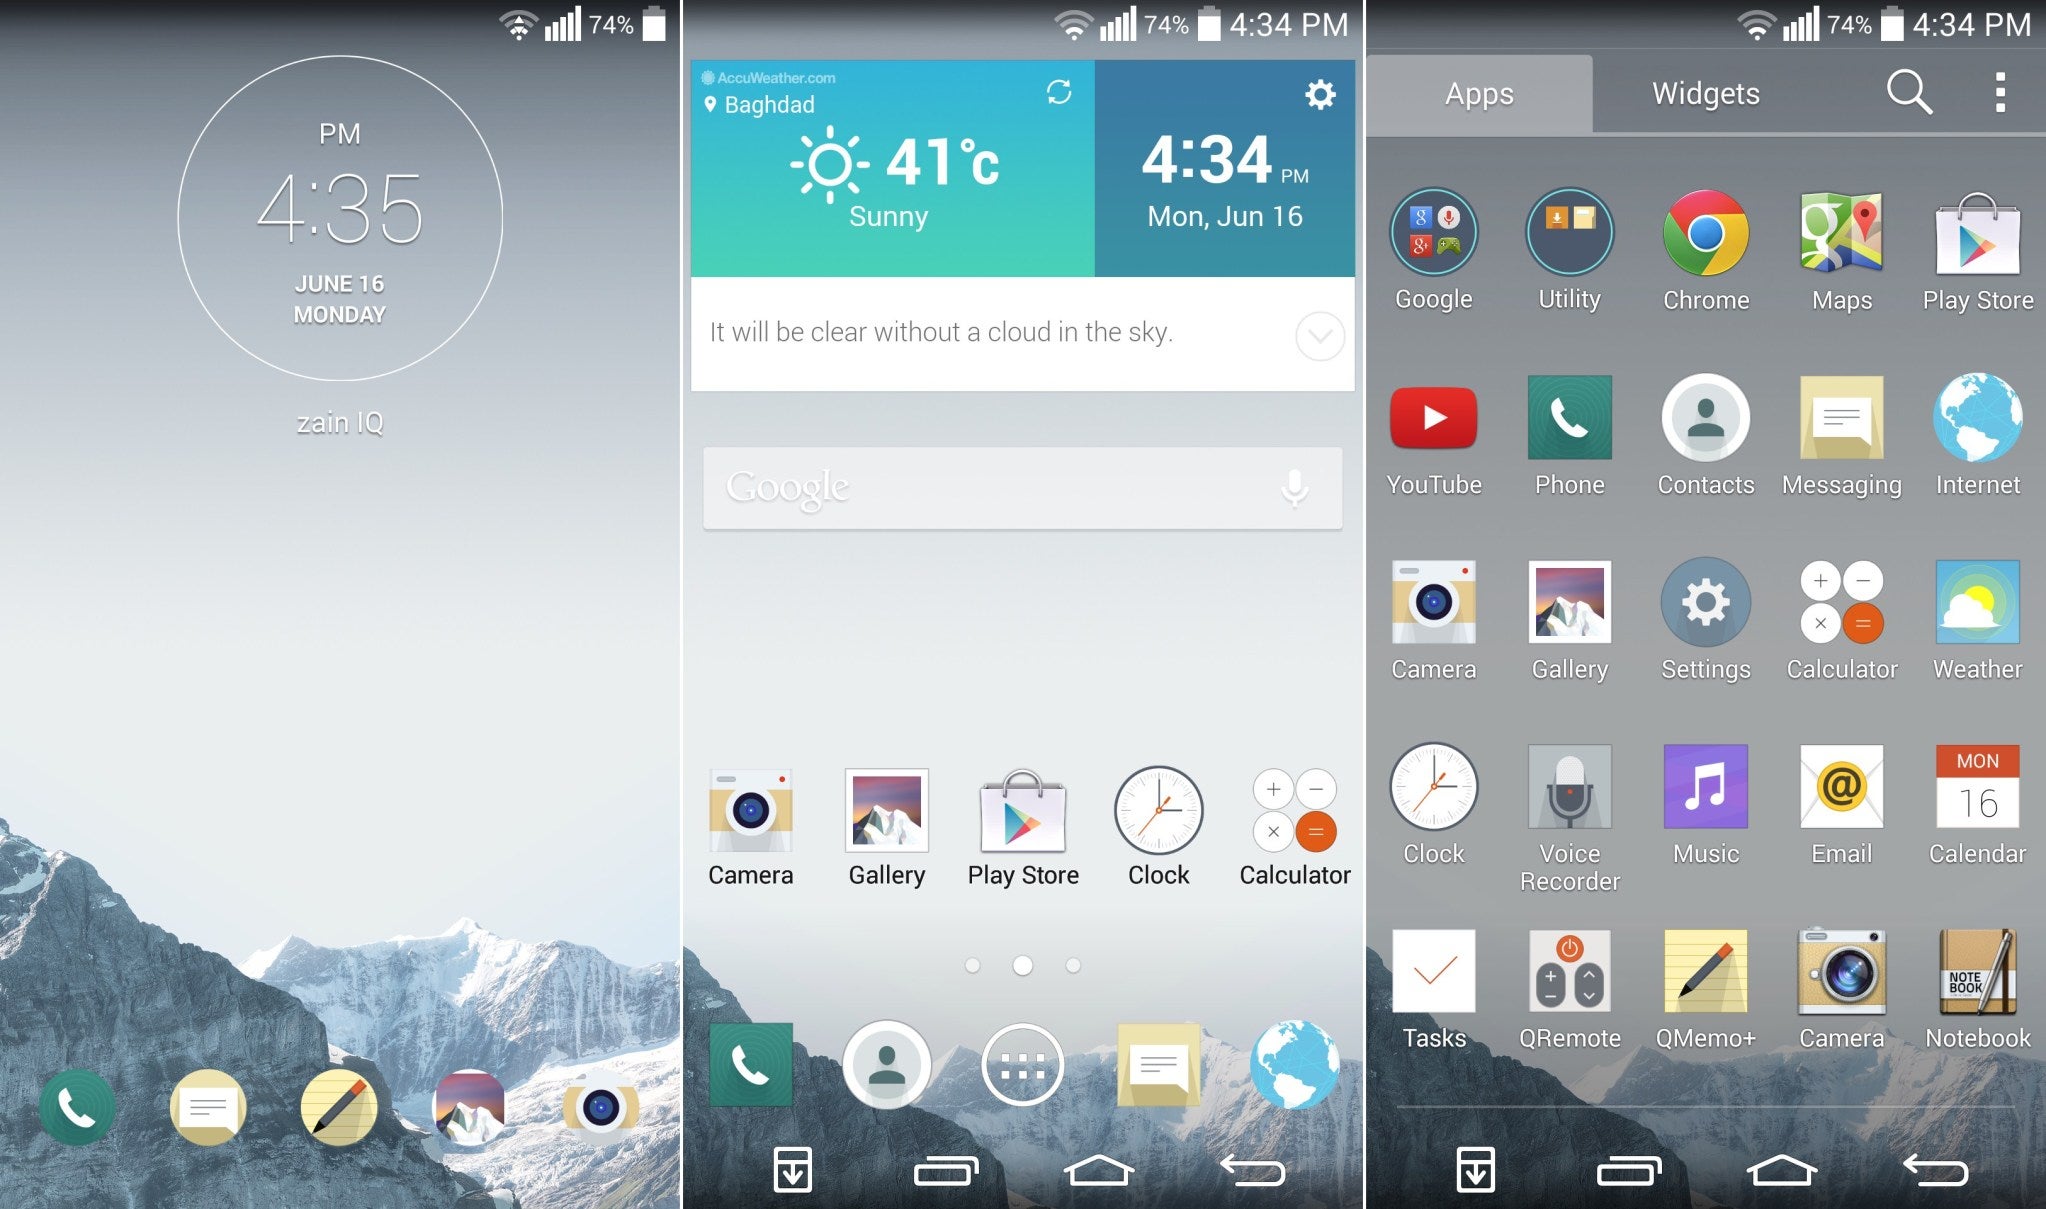 How to pimp your LG G2 with the all-new flat Optimus interface from the G3